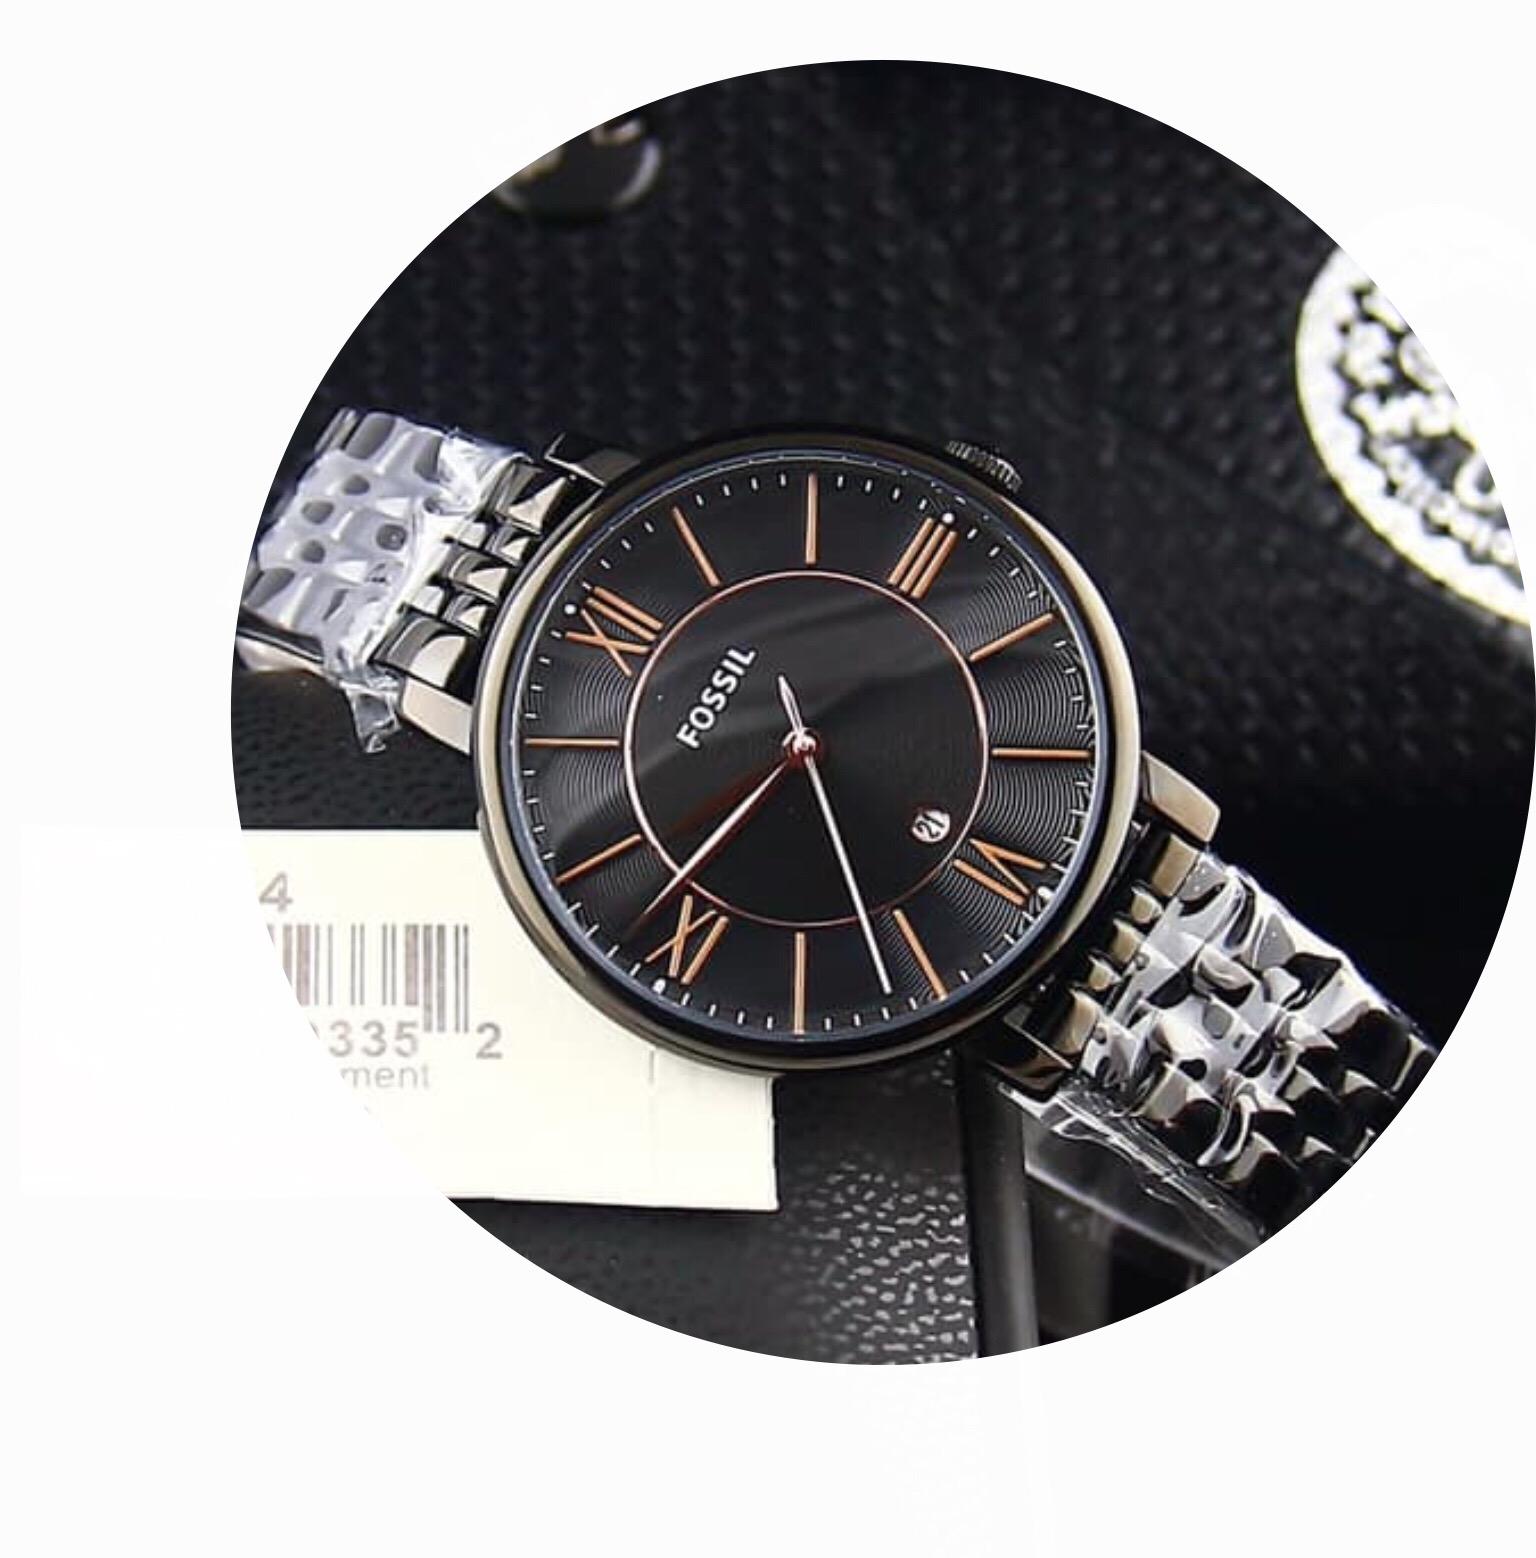 Fossil Jacqueline Black Stainless Steel Watch Factory Sale, UP TO 